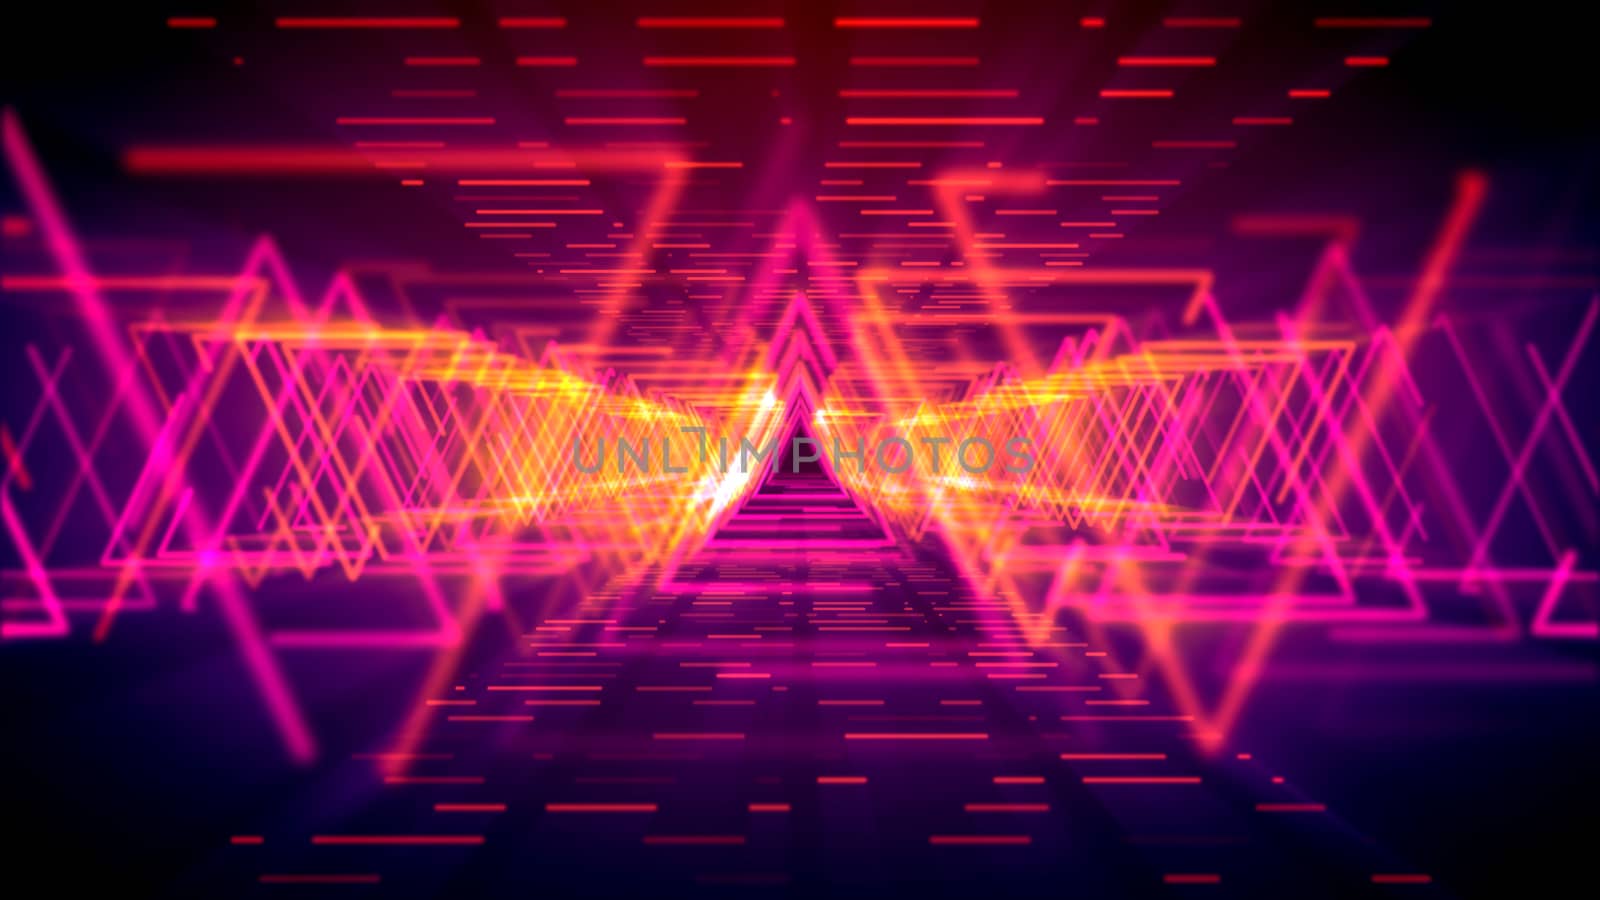 Hi-tech 3d illustration of sparkling yellow triangles forming long and straight passages for flying objects in the pink cyber reality. It resembles futuristic time portals.